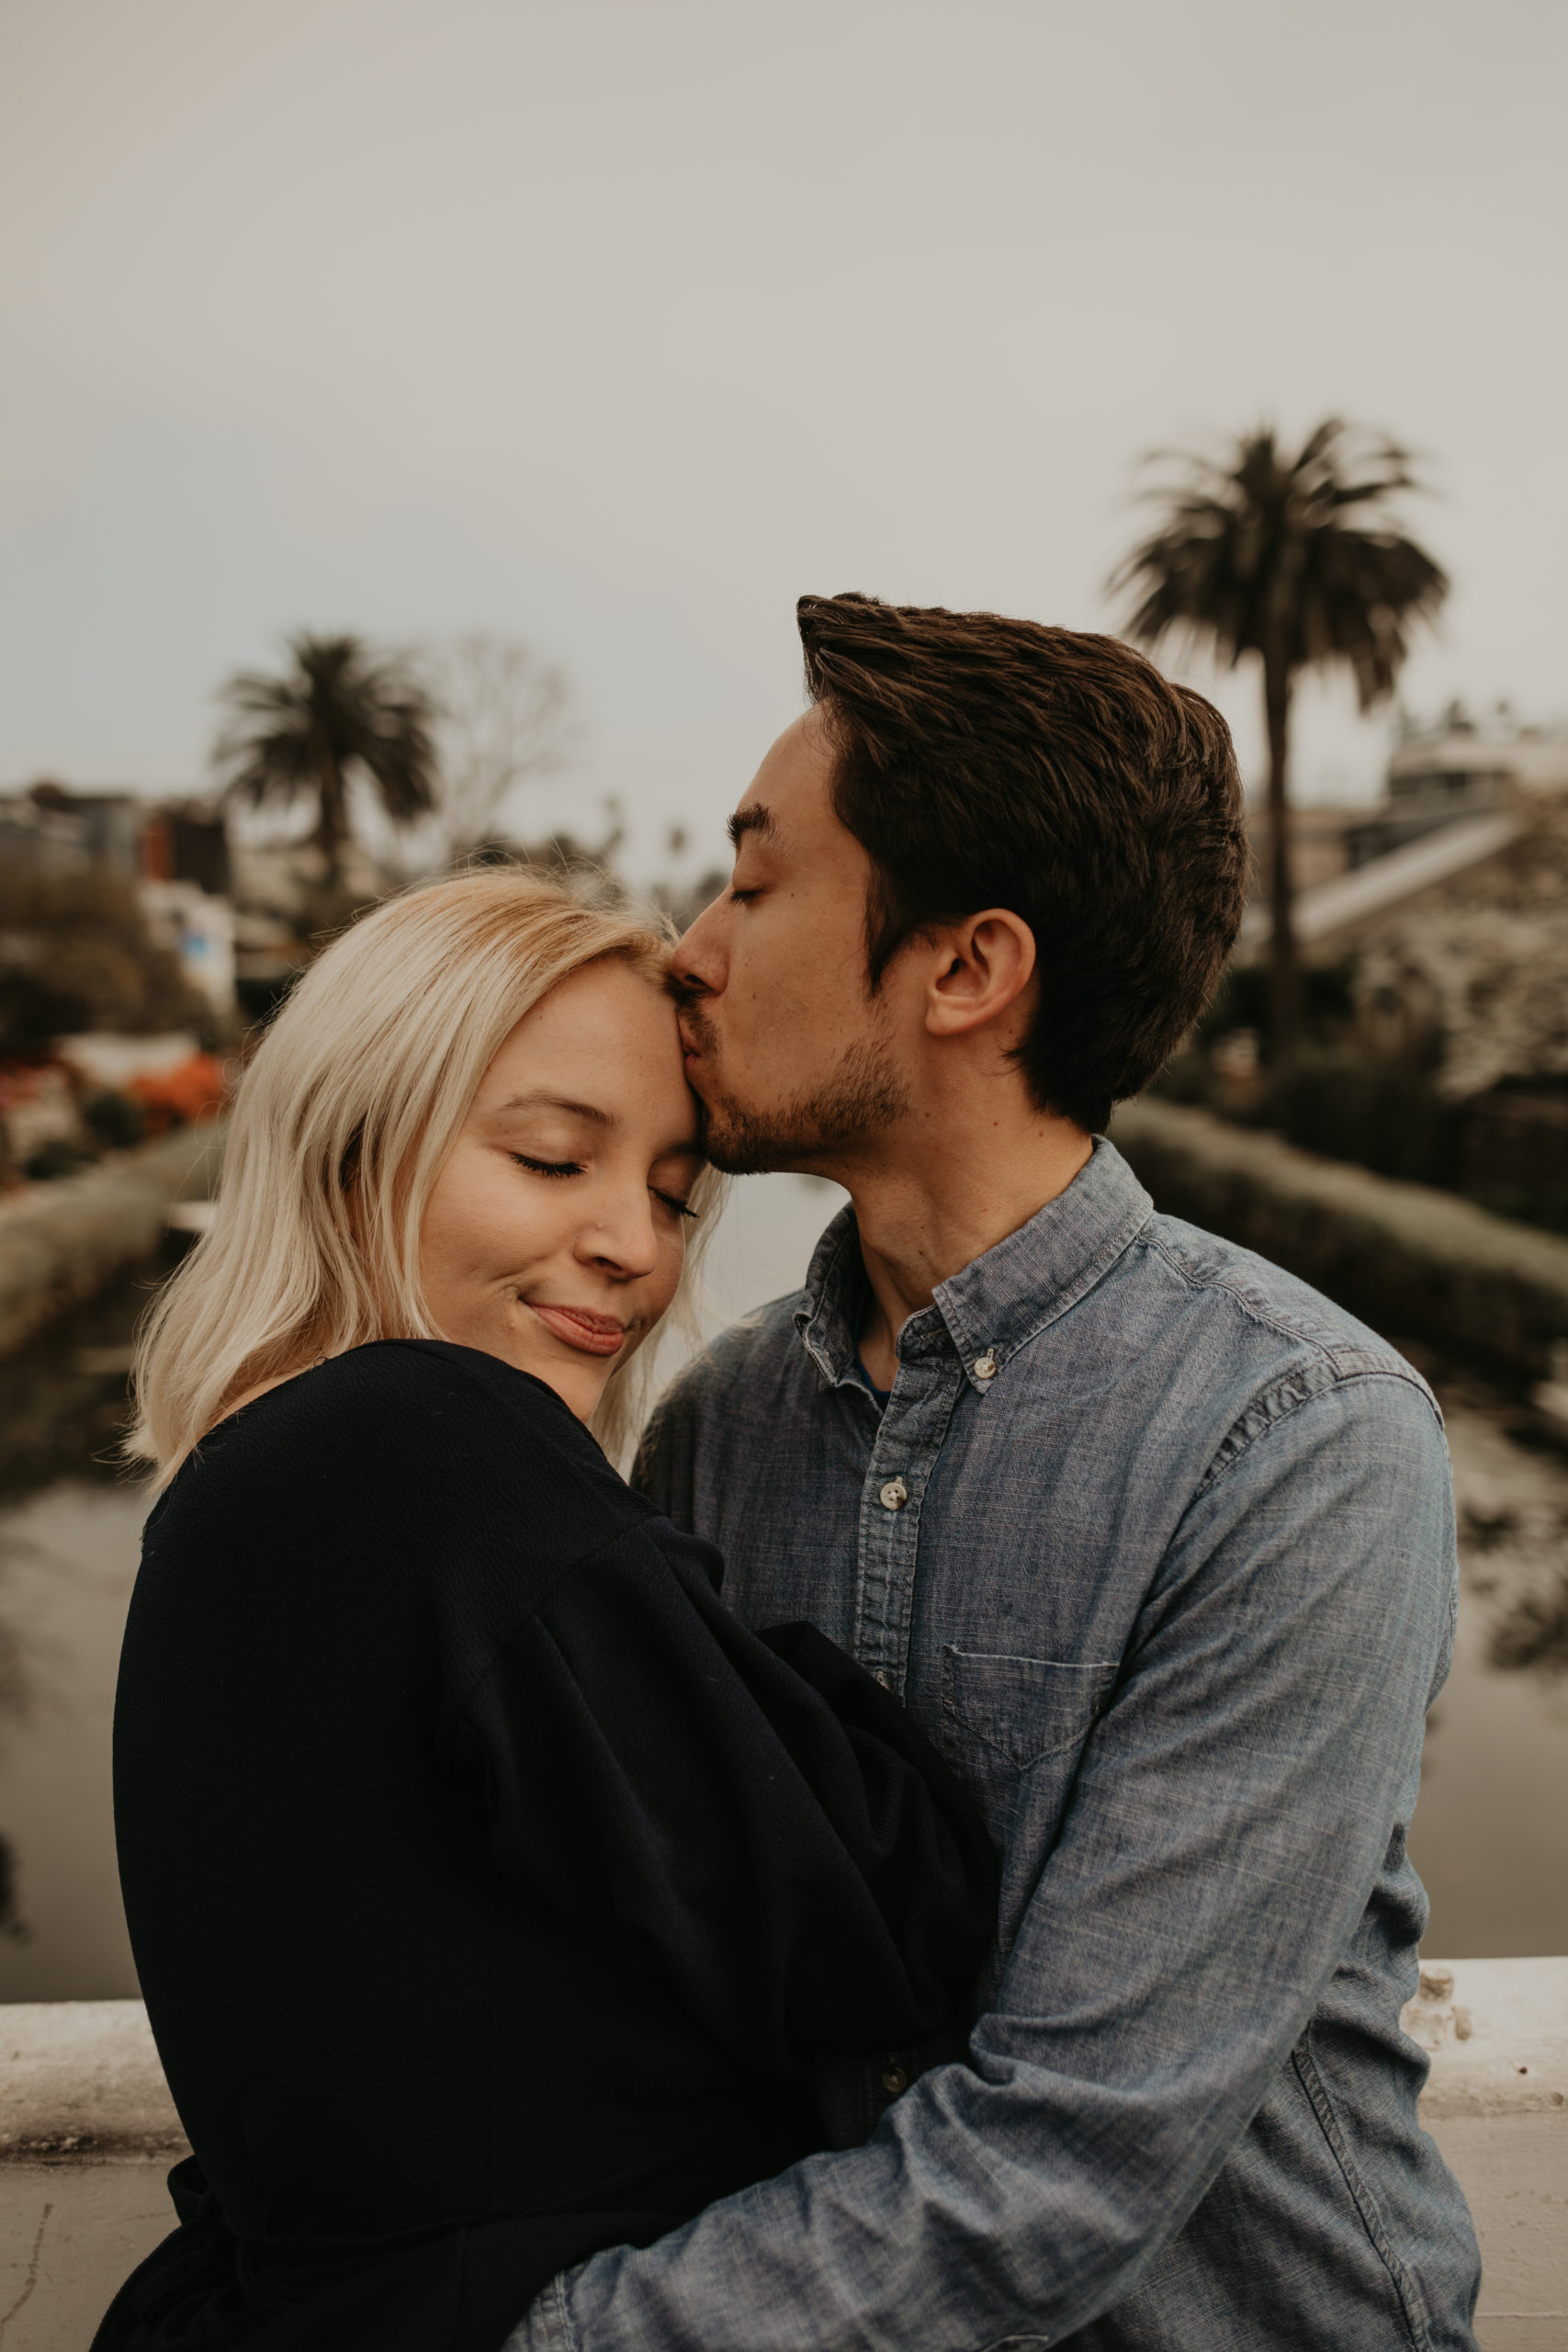 Boyfriend kisses girlfriend on forehead at Venice Canals, California with Cara Gilhula Photography